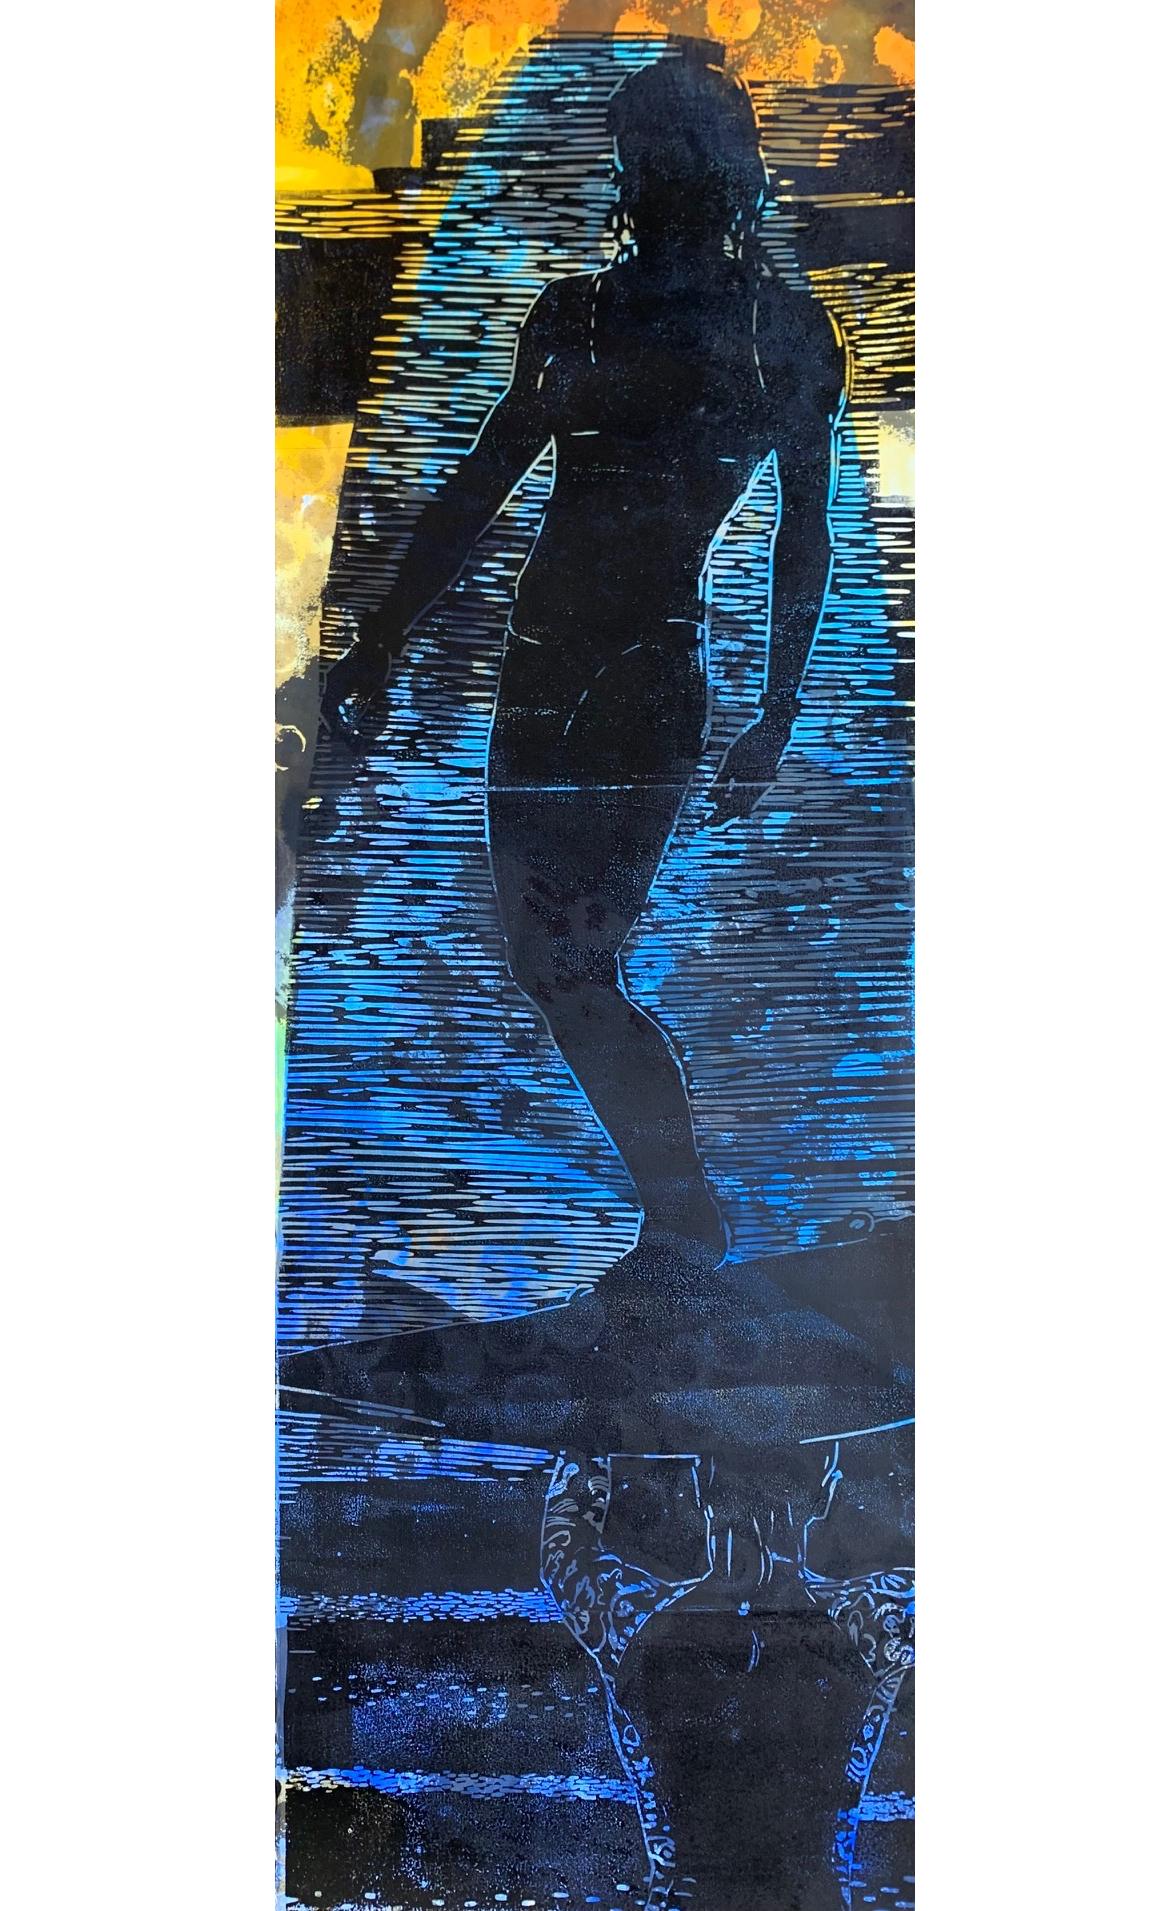 Carol Bennett Figurative Painting - "Blue Board" Ink and Oil Woman on a surfboard held up by another woman. 